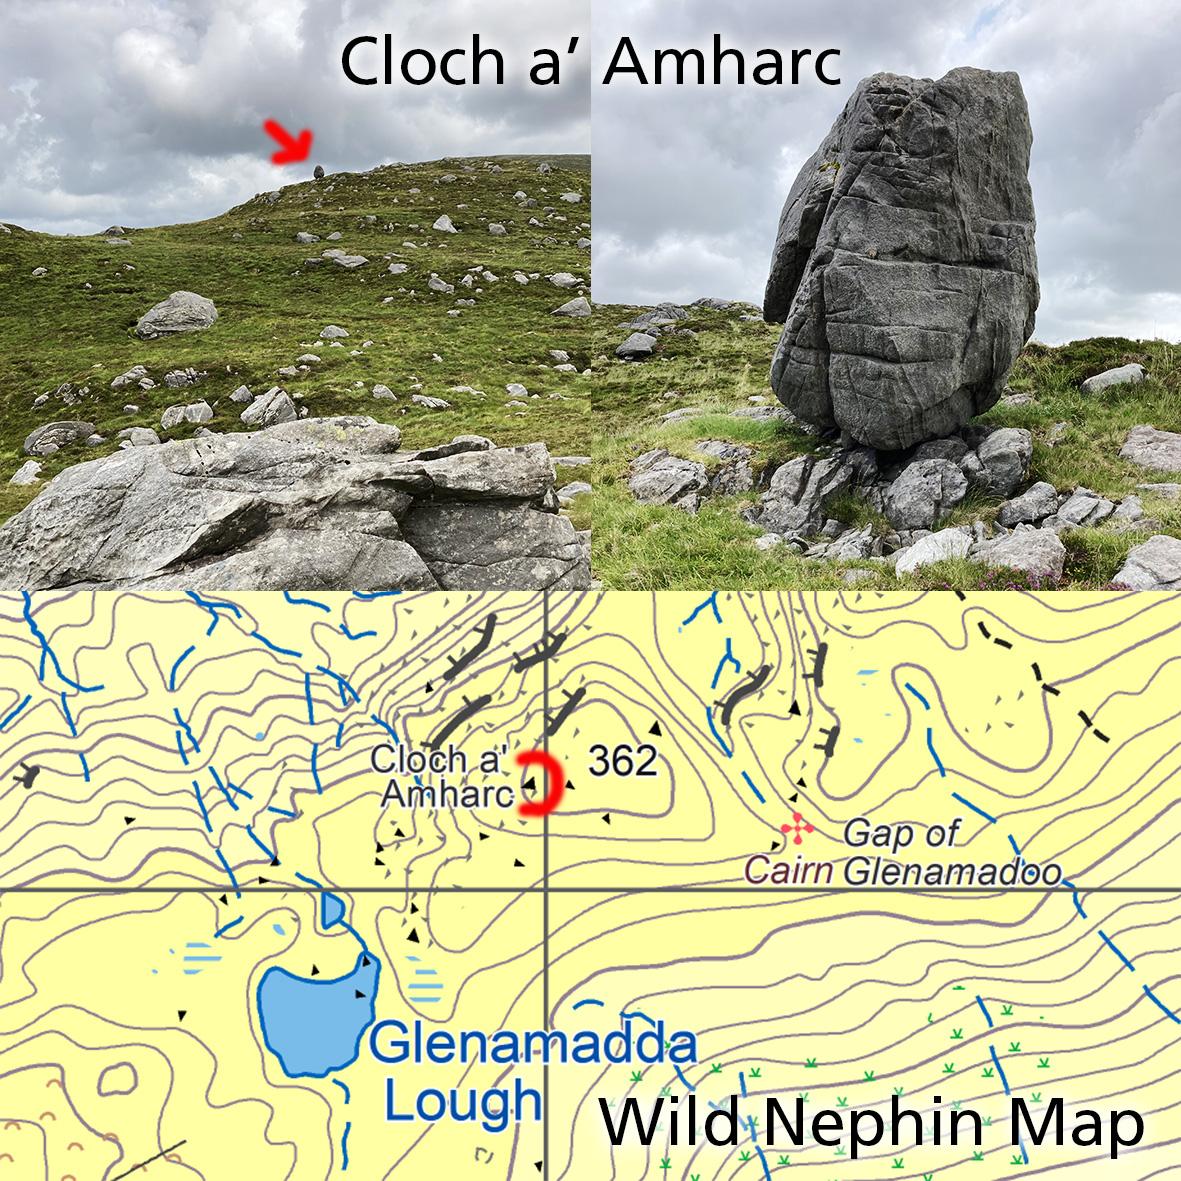 You are currently viewing Cloch a’ Amhairc